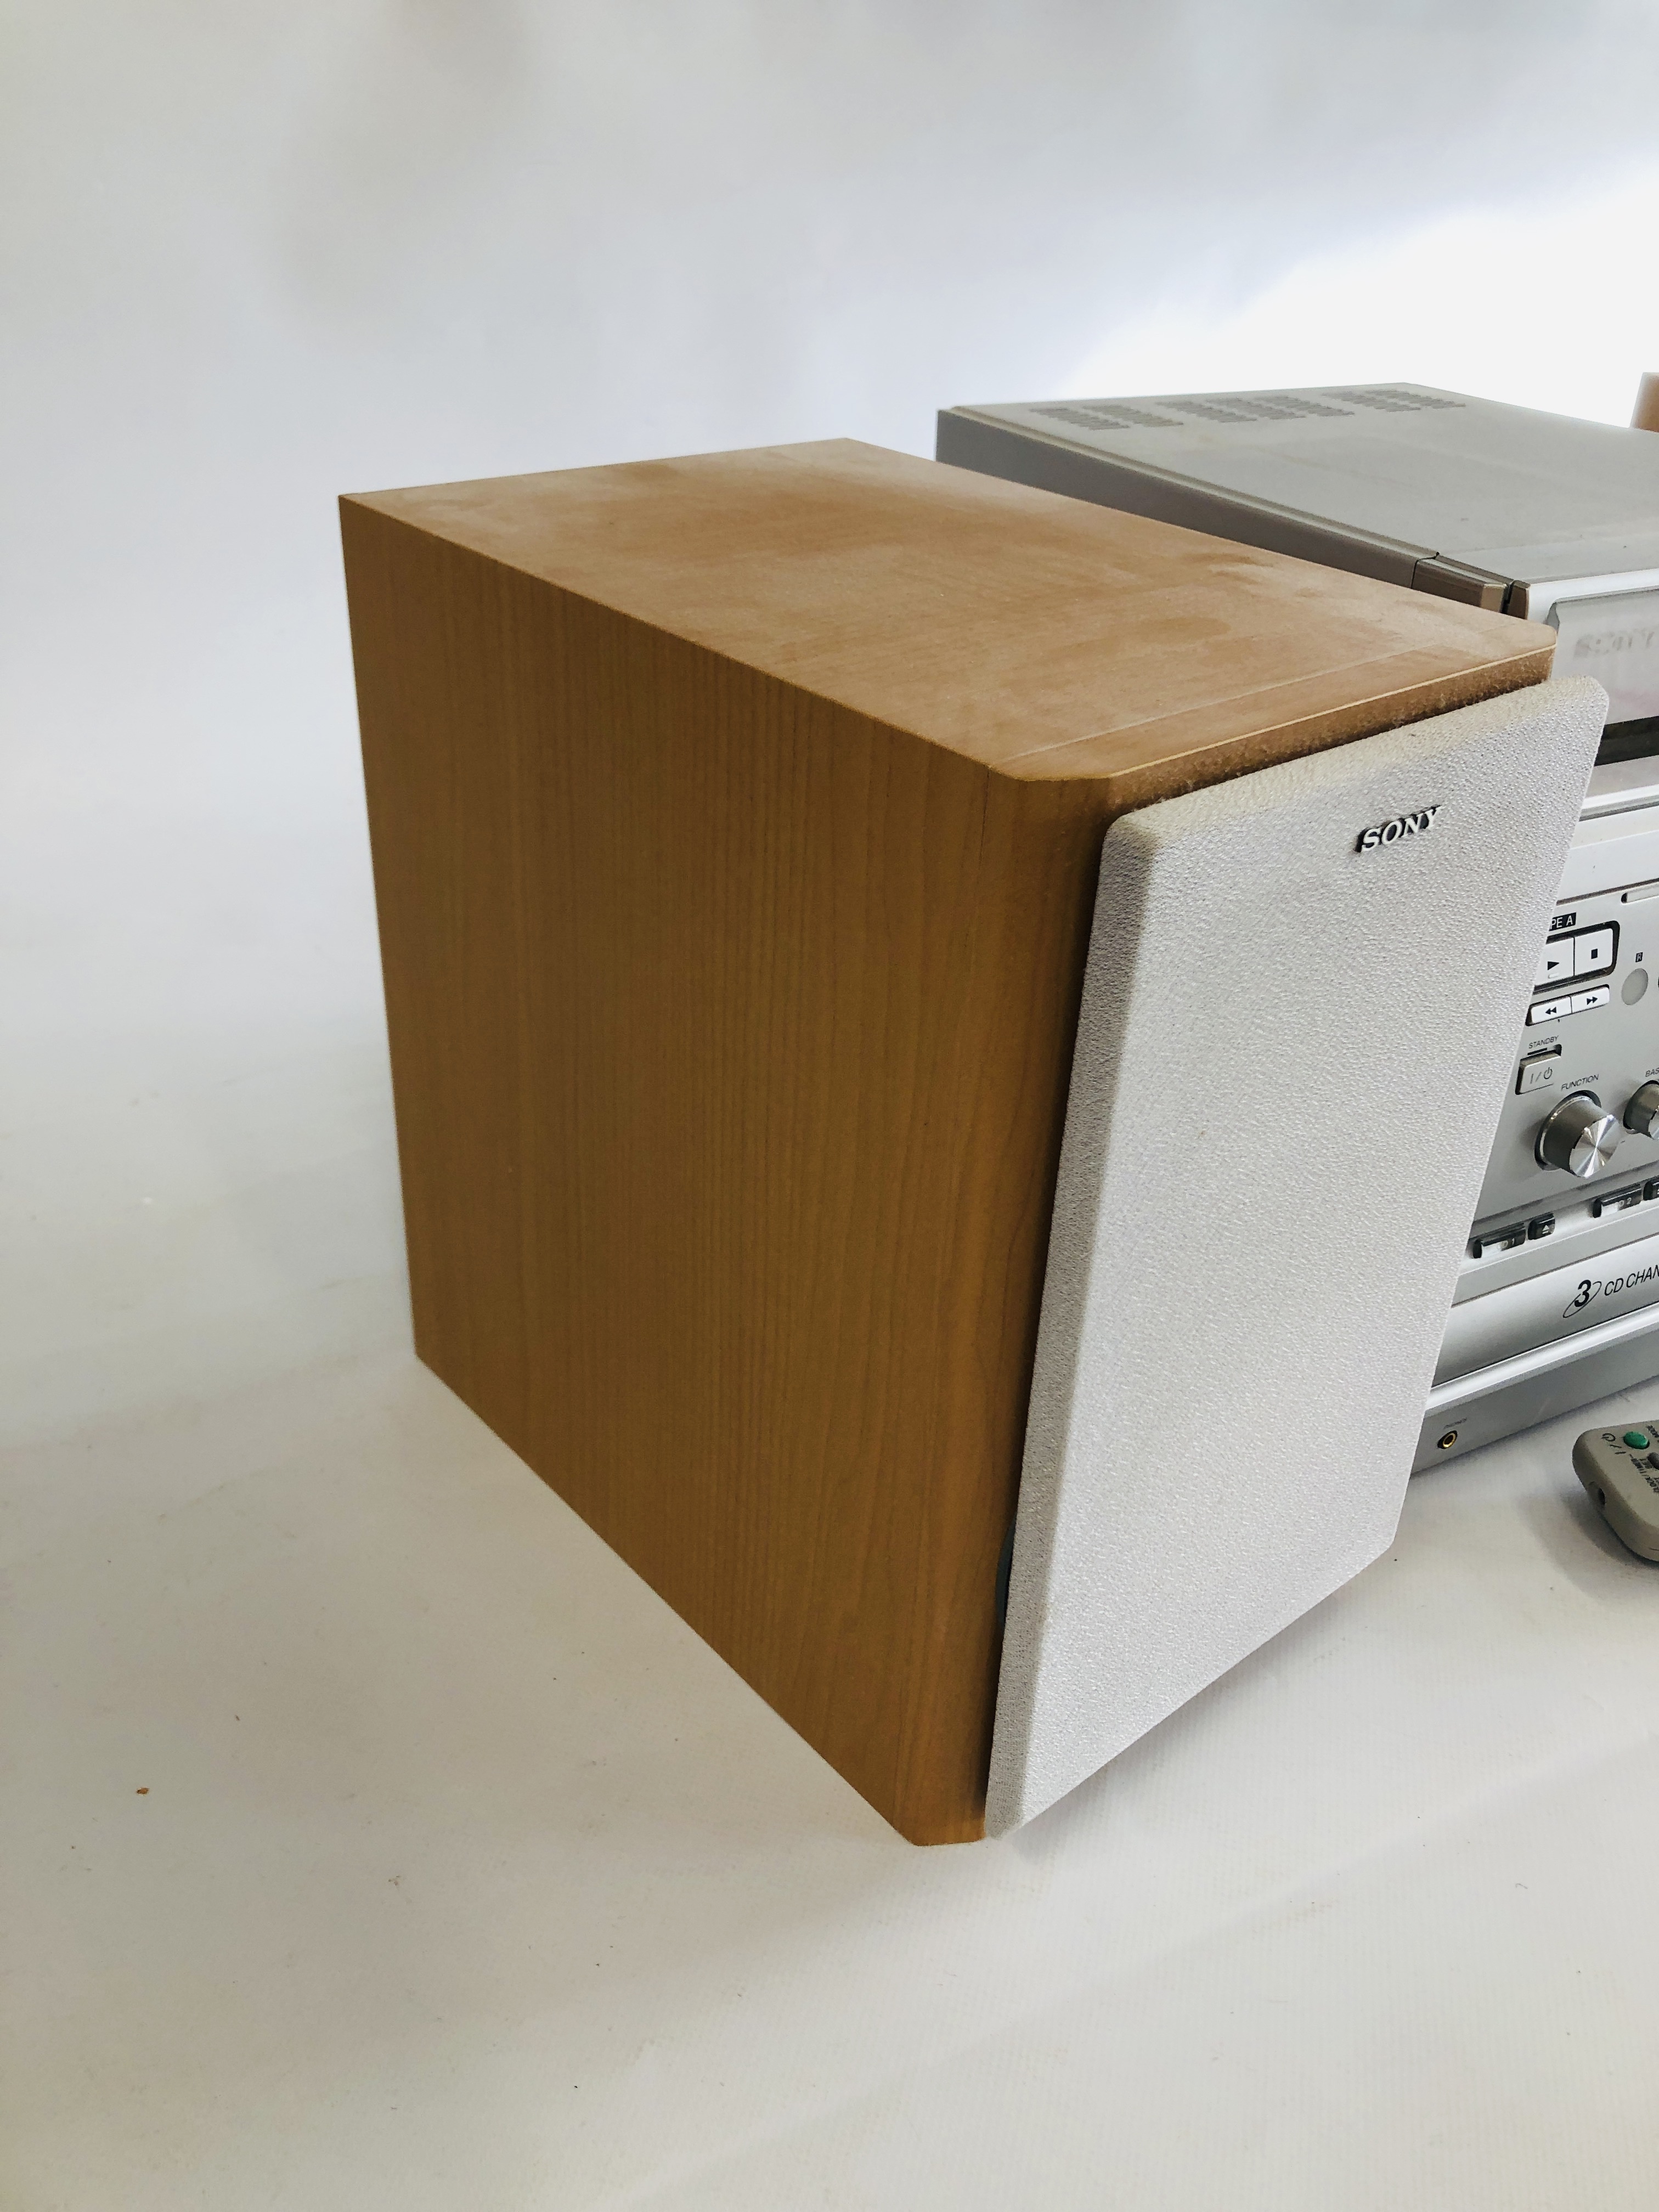 A SONY HIFI SYSTEM WITH SPEAKERS. MODEL CMT-CP300 - SOLD AS SEEN. - Image 3 of 4